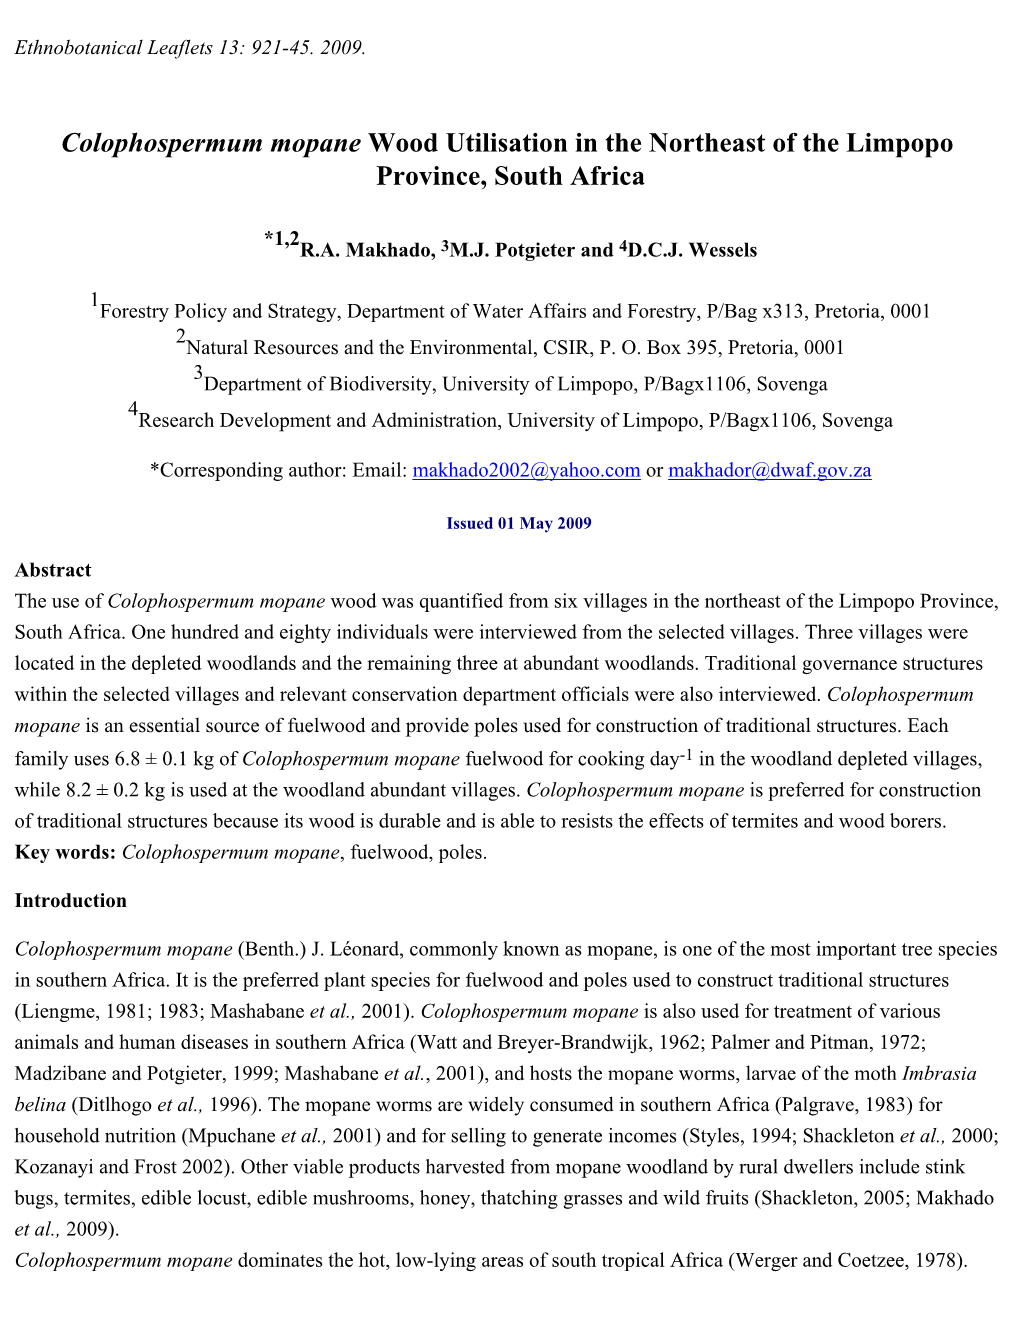 Colophospermum Mopane Wood Utilisation in the Northeast of the Limpopo Province, South Africa